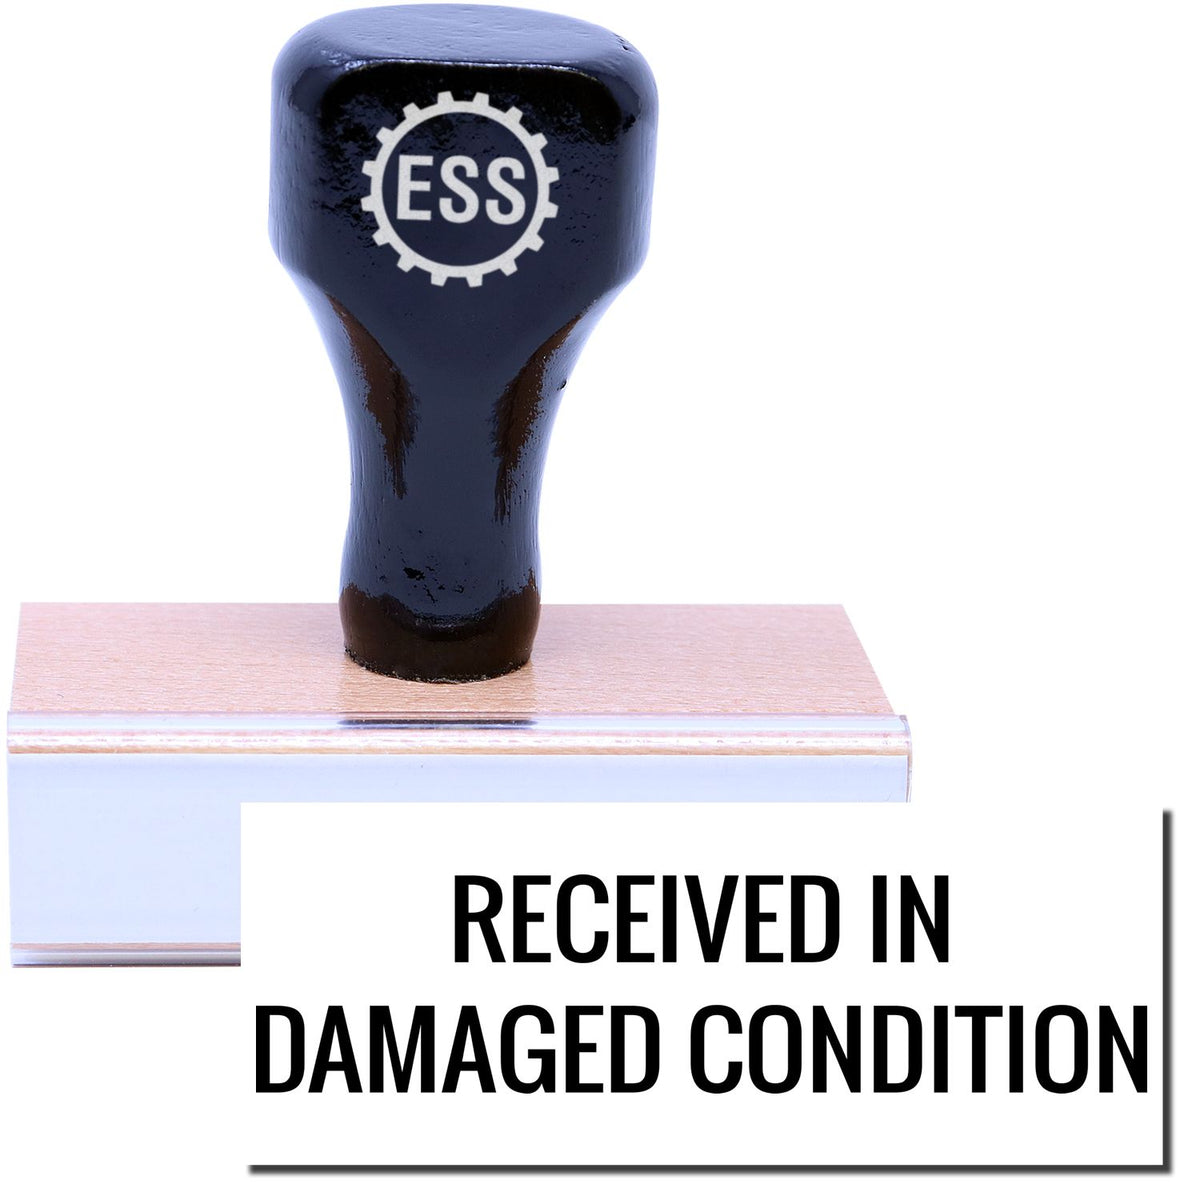 A stock office rubber stamp with a stamped image showing how the text &quot;RECEIVED IN DAMAGED CONDITION&quot; is displayed after stamping.